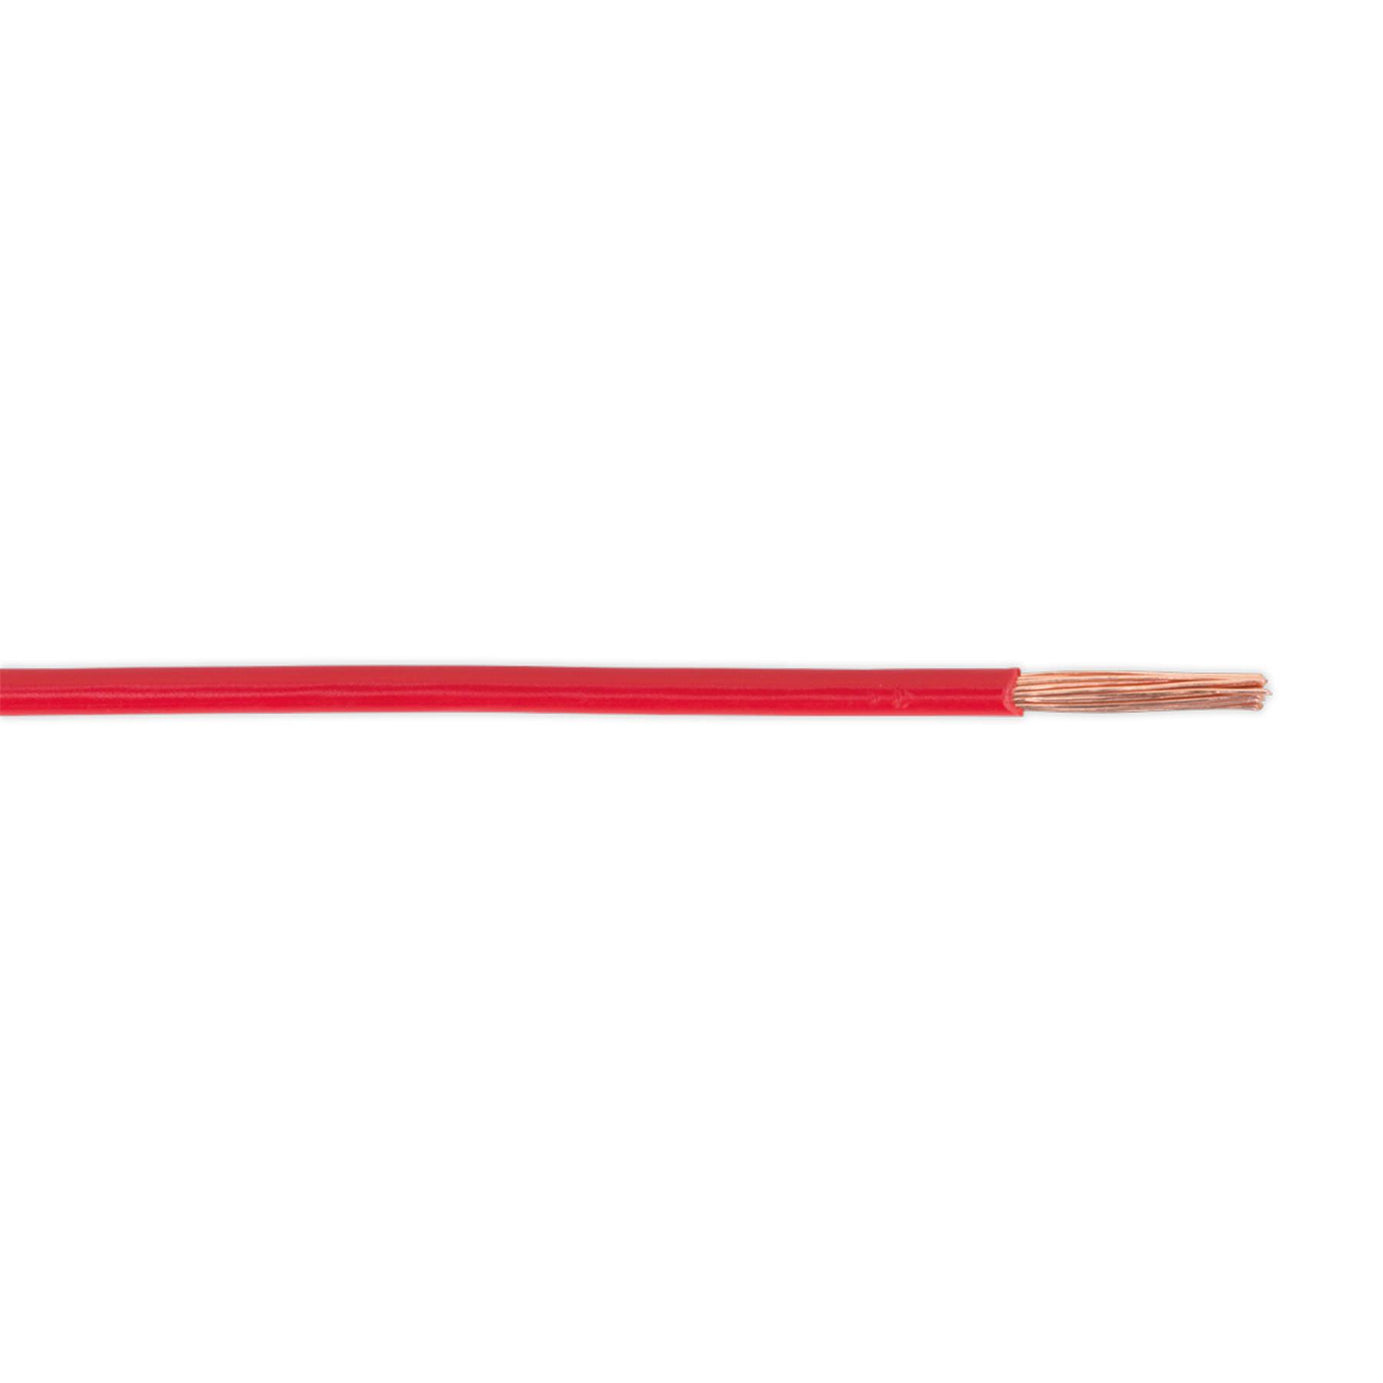 Sealey Thin Wall Single Core Automotive Cable Wire 2mm² 28/0.30mm 50m Red